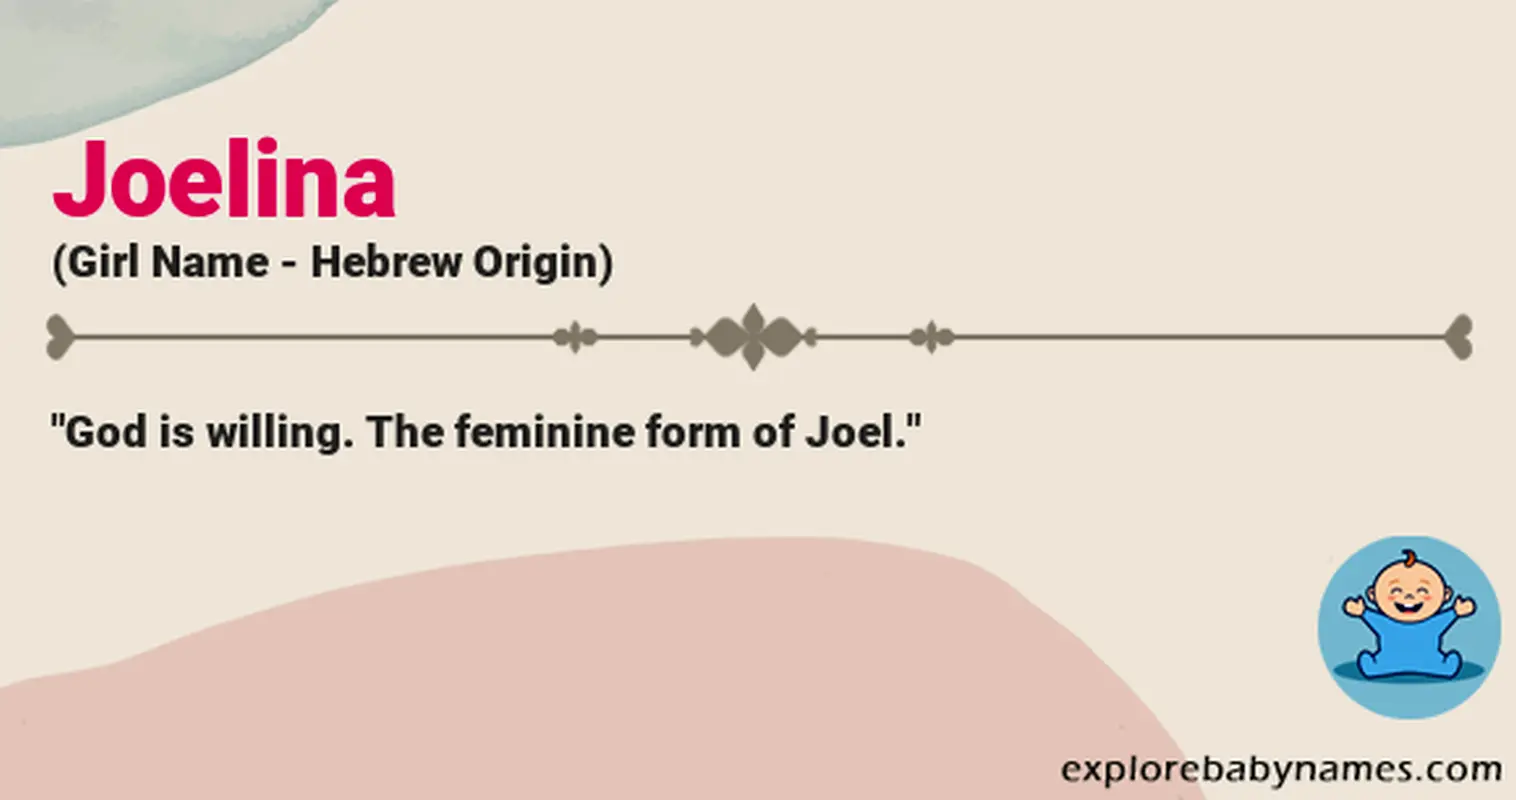 Meaning of Joelina